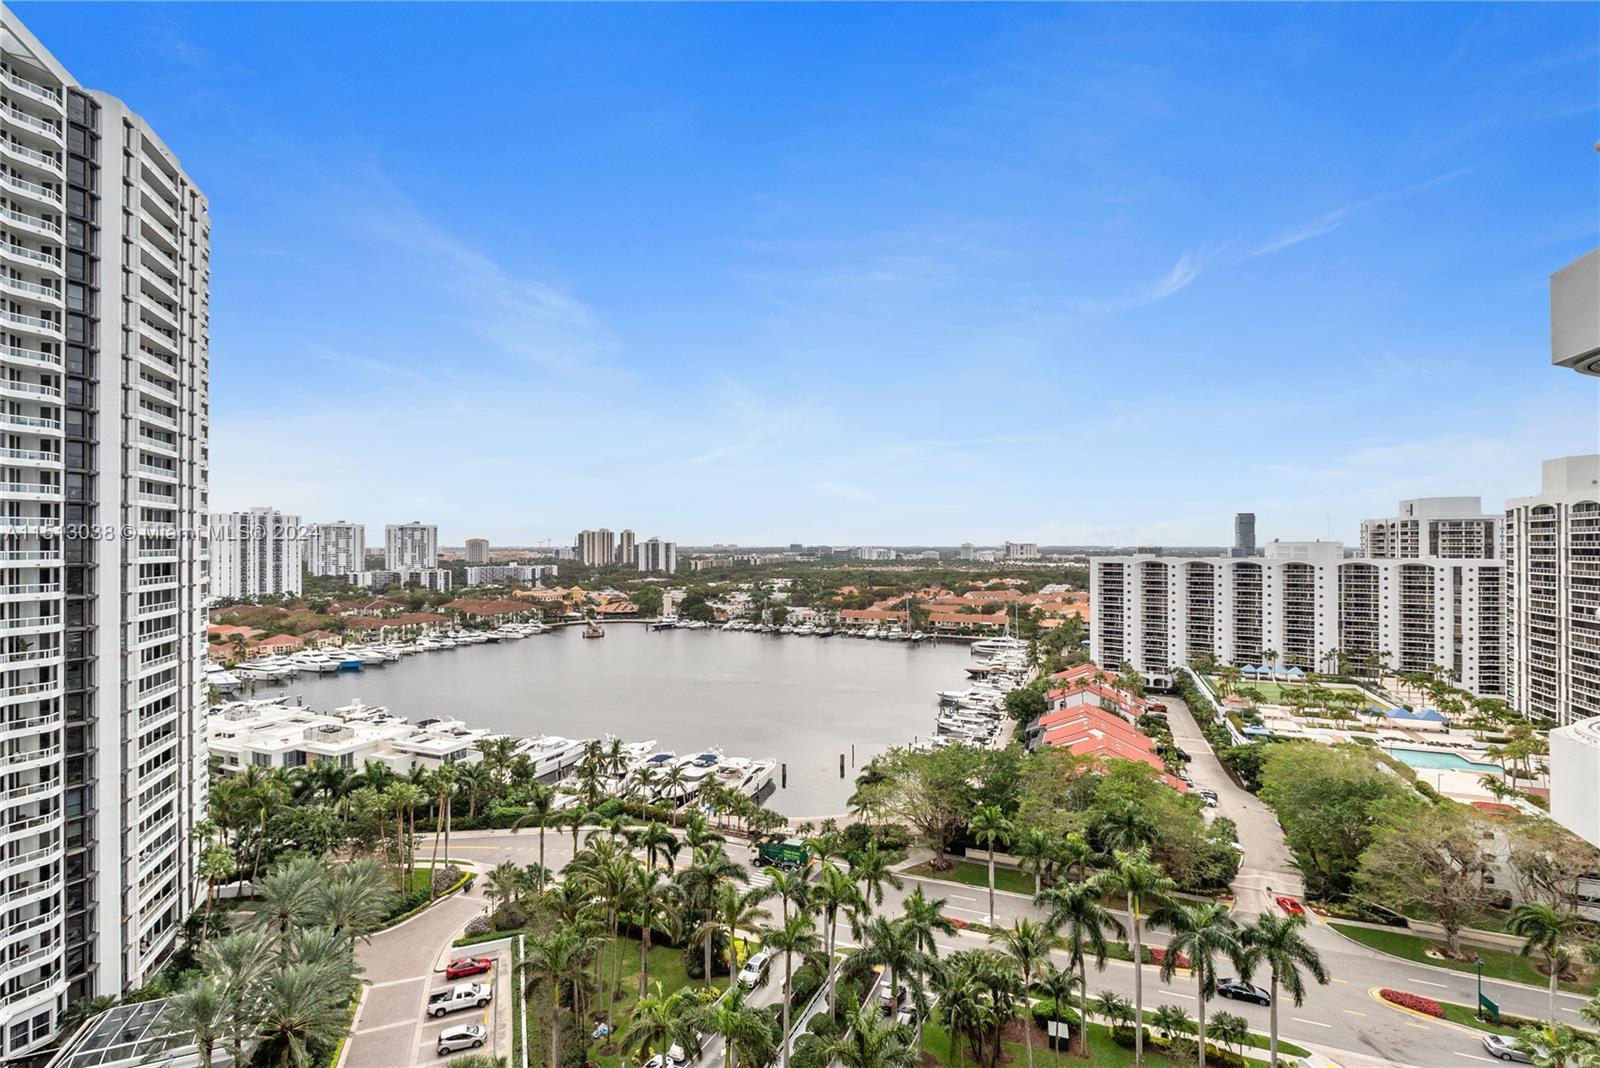 North Tower at The Point / Aventura / 3 Beds / 2 Baths / 1,870 sq. ft. of living area / Split Floor 